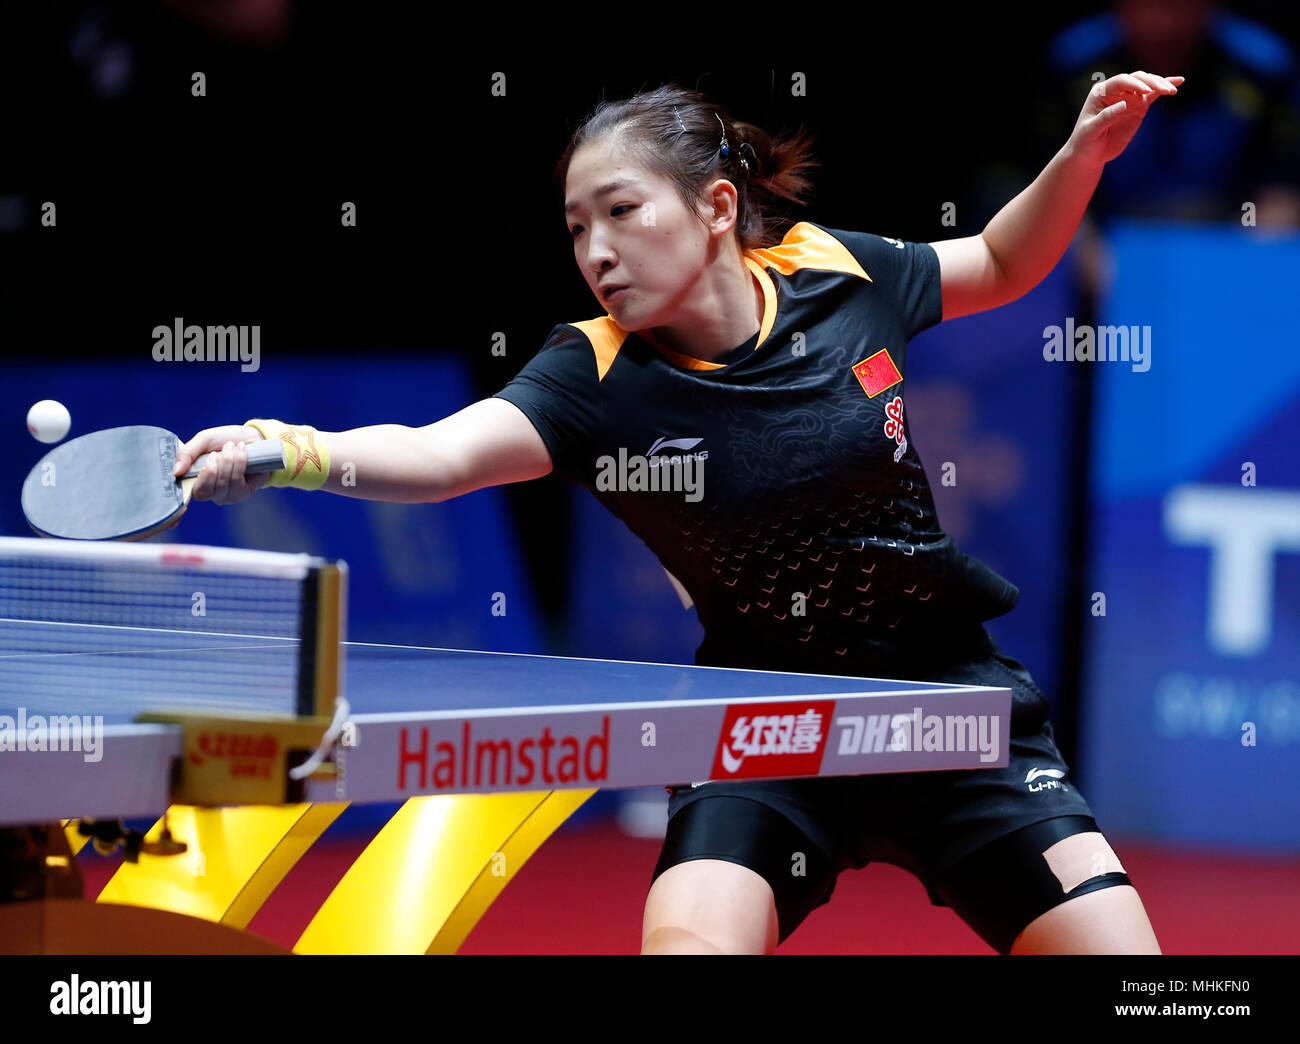 Halmstad, Sweden. 1st May, 2018. Liu Shiwen of China returns the ball to  Jennifer Jonsson of Sweden during the Women's Group A fifth round match of  2018 World Team Table Tennis Championships